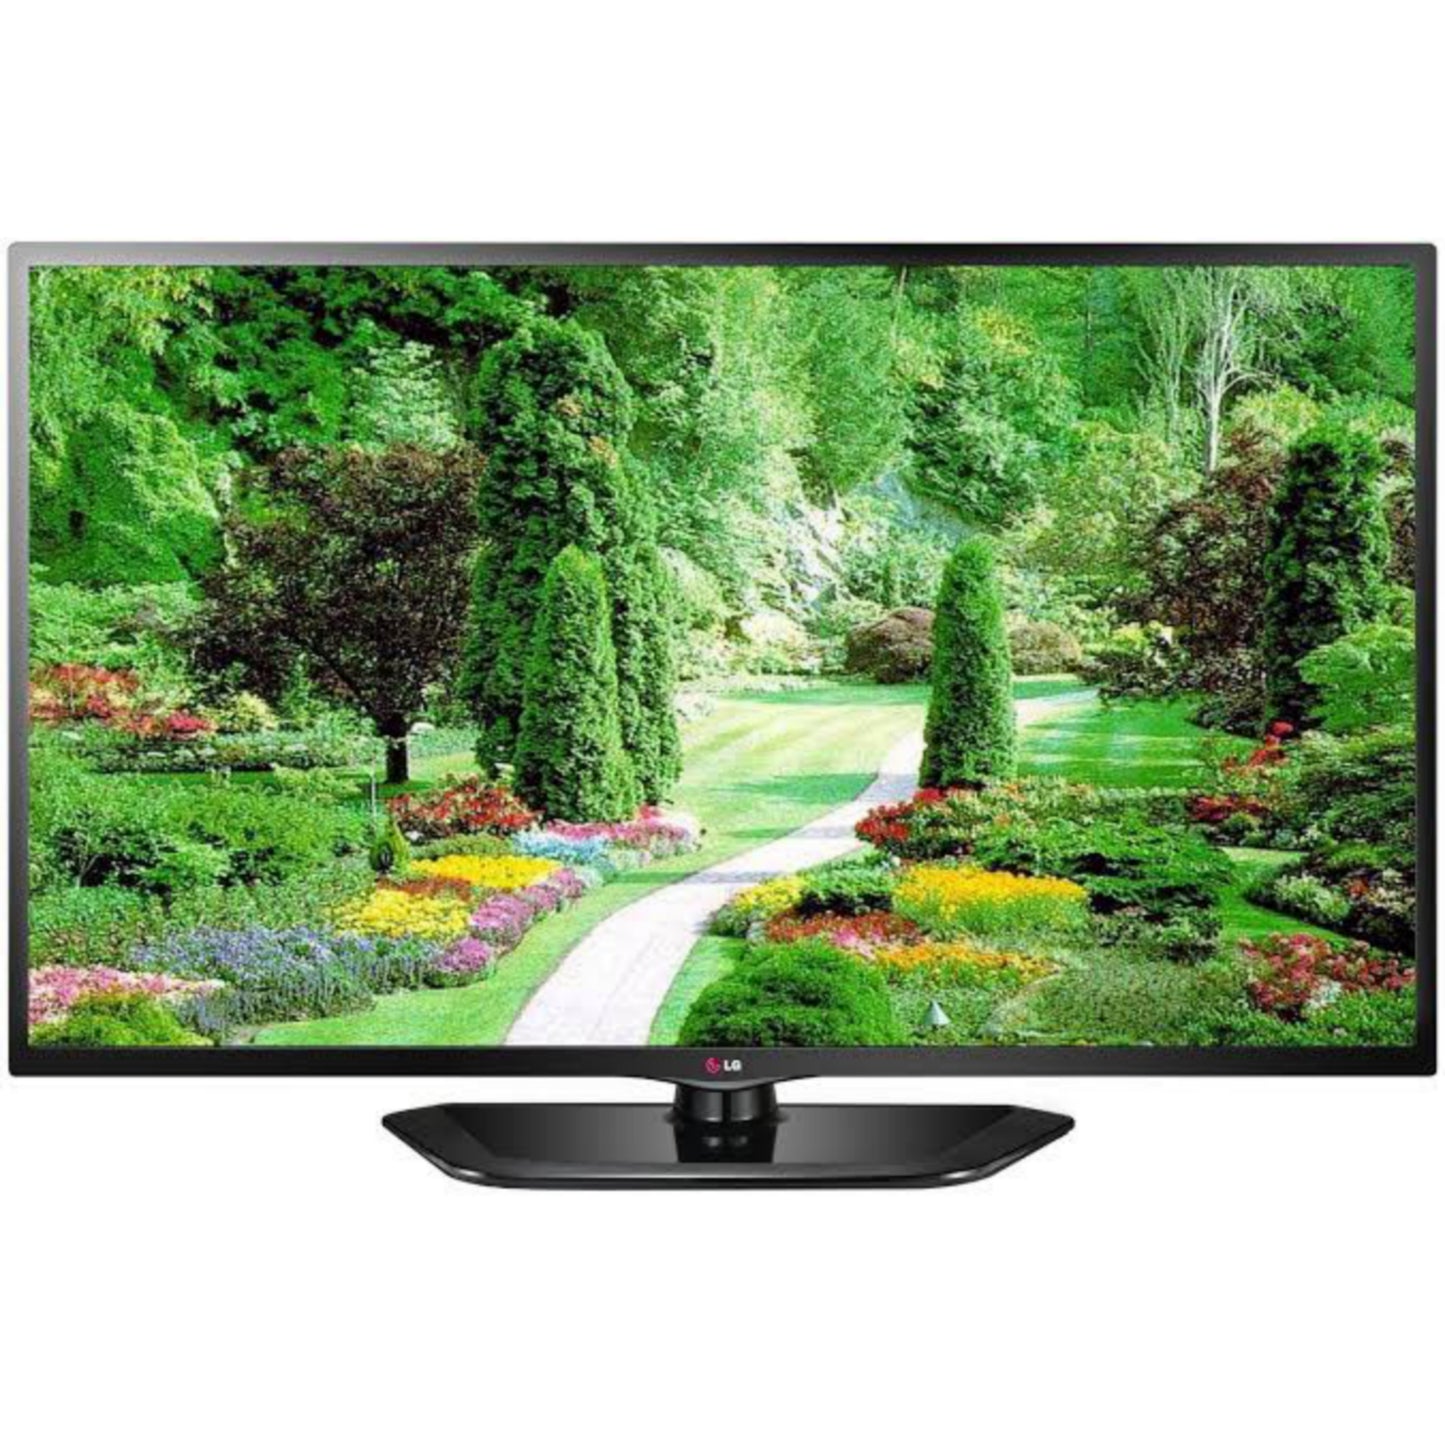 LG 42 Inch 42LN5400 Widescreen 120Hz 1080p FHD LED TV - London Used